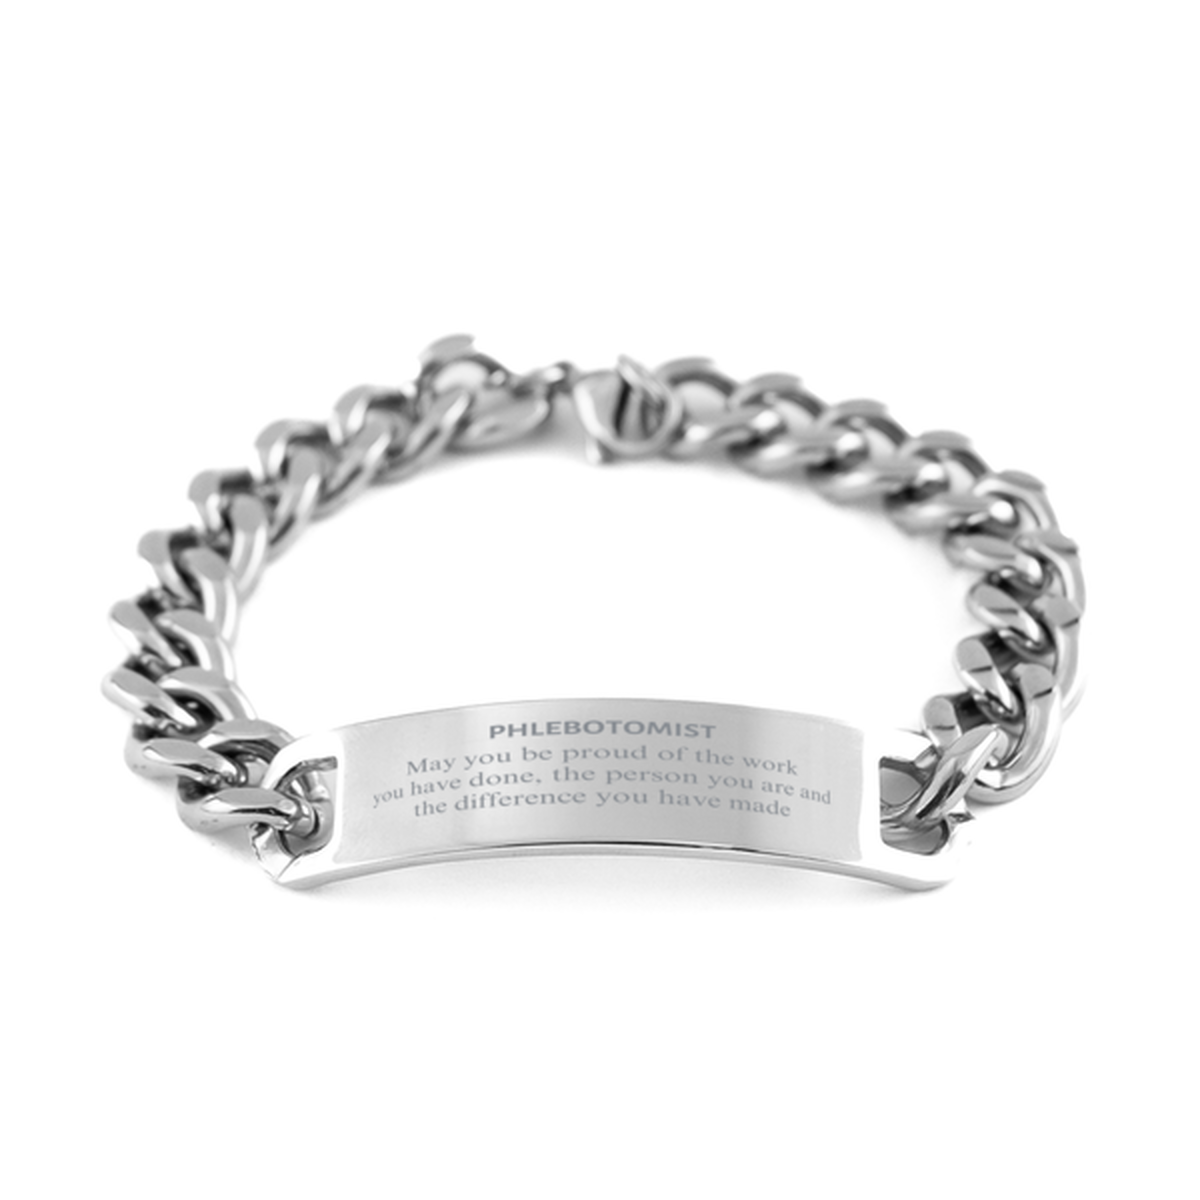 Phlebotomist May you be proud of the work you have done, Retirement Phlebotomist Cuban Chain Stainless Steel Bracelet for Colleague Appreciation Gifts Amazing for Phlebotomist